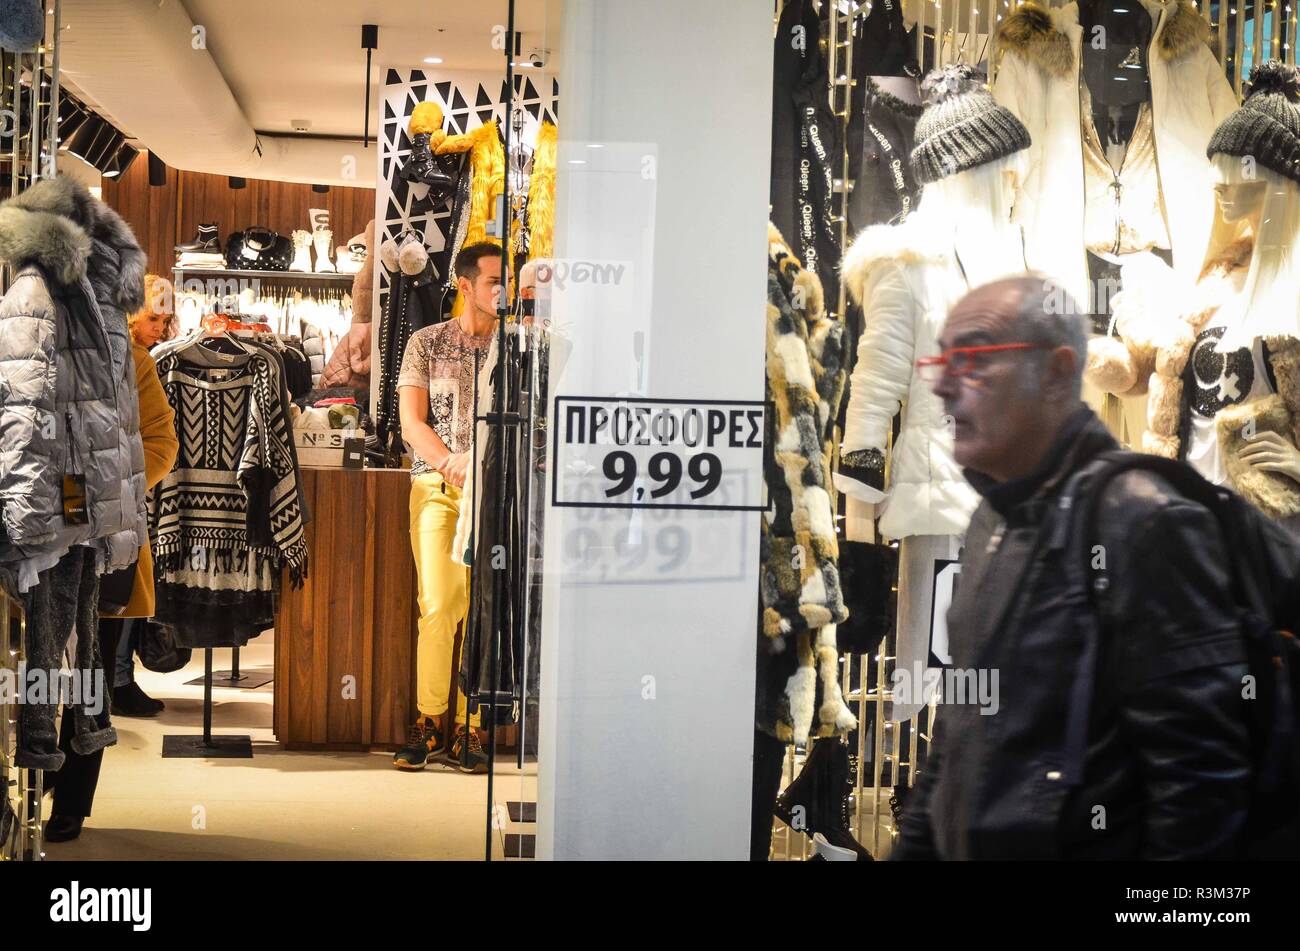 Athens, Greece. 23rd Nov, 2018. Shoppers are seen at a store during the  Black Friday.Black Friday kicked off early this morning as people were  looking for decent deals pre Christmas period. Credit: